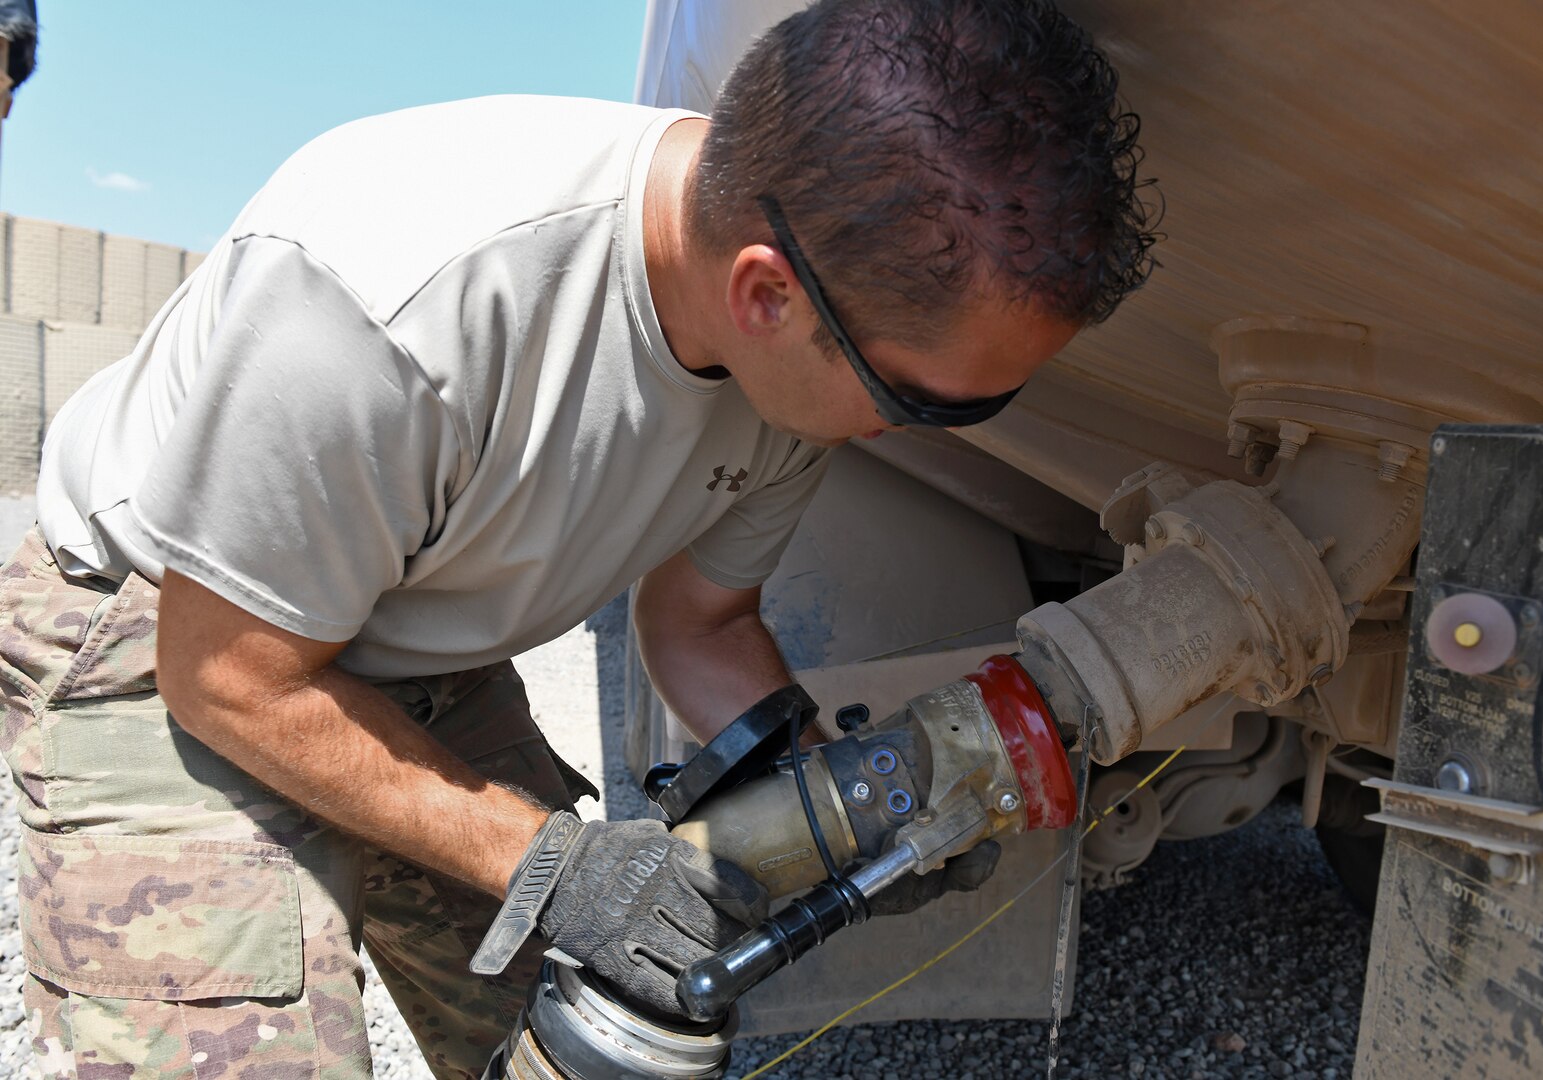 U.S. Air Force Tech. Sgt. James Hopper, 726th Expeditionary Air Base Squadron Vehicle Maintenance flight chief, connects the master meter to an R11 refueling truck to calibrate the fuel flow at Chabelley Airfield, Djibouti, Nov. 8, 2019. The 726th EABS Vehicle Maintenance team members service and repair more than 140 Air Force vehicles in the Horn of Africa area of responsibility. (U.S. Air Force photo by Staff Sgt. Alex Fox Echols III)